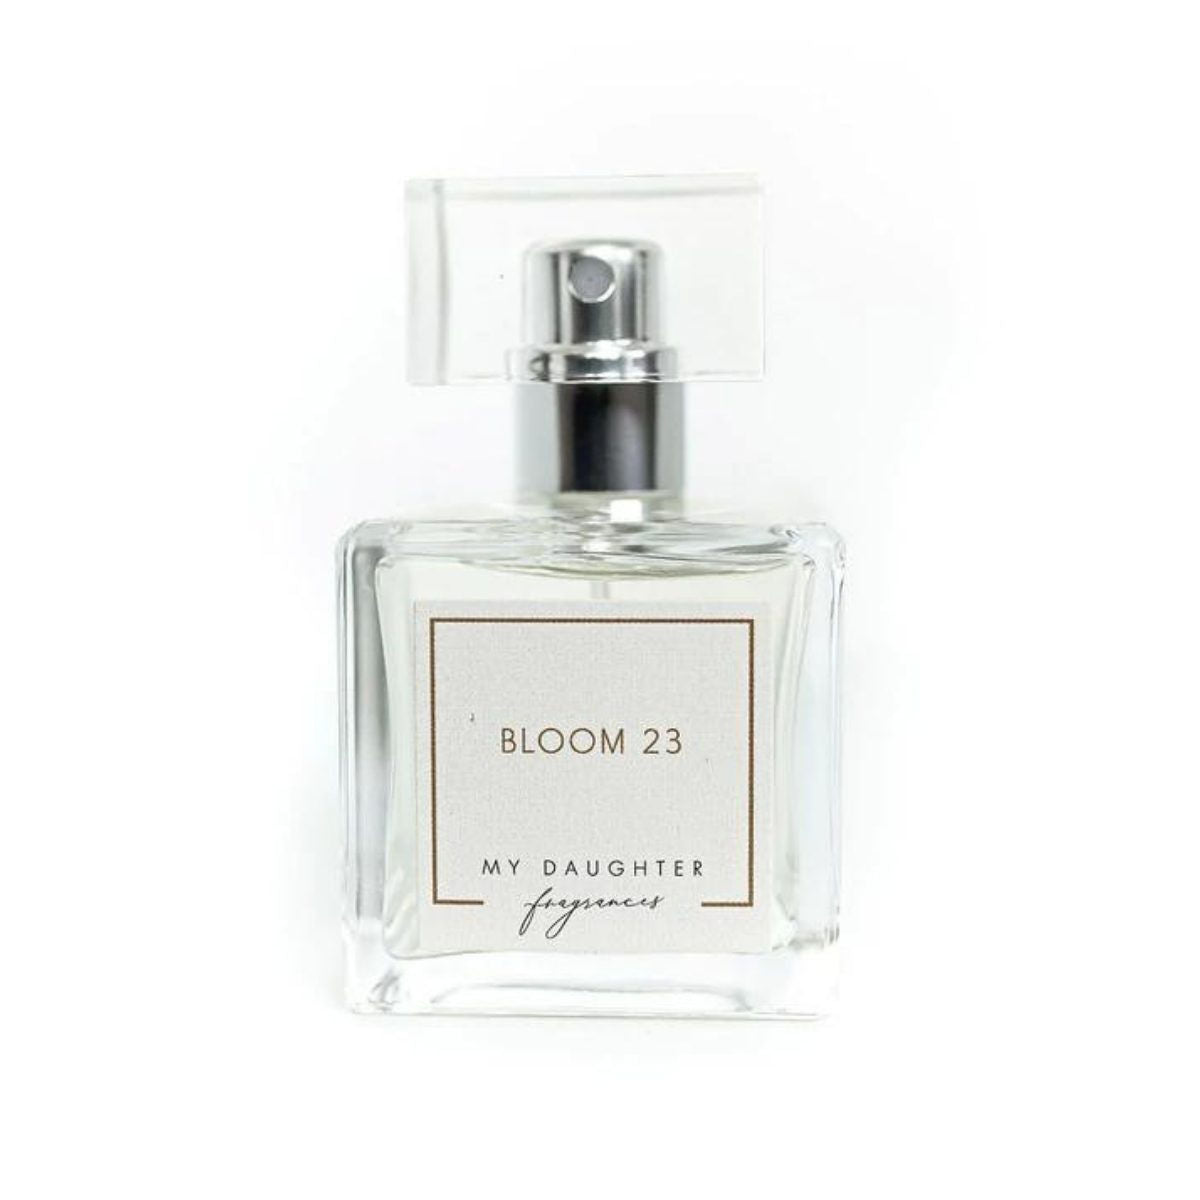 My Daughter Fragrances - Bloom 23 - The Green Kiss